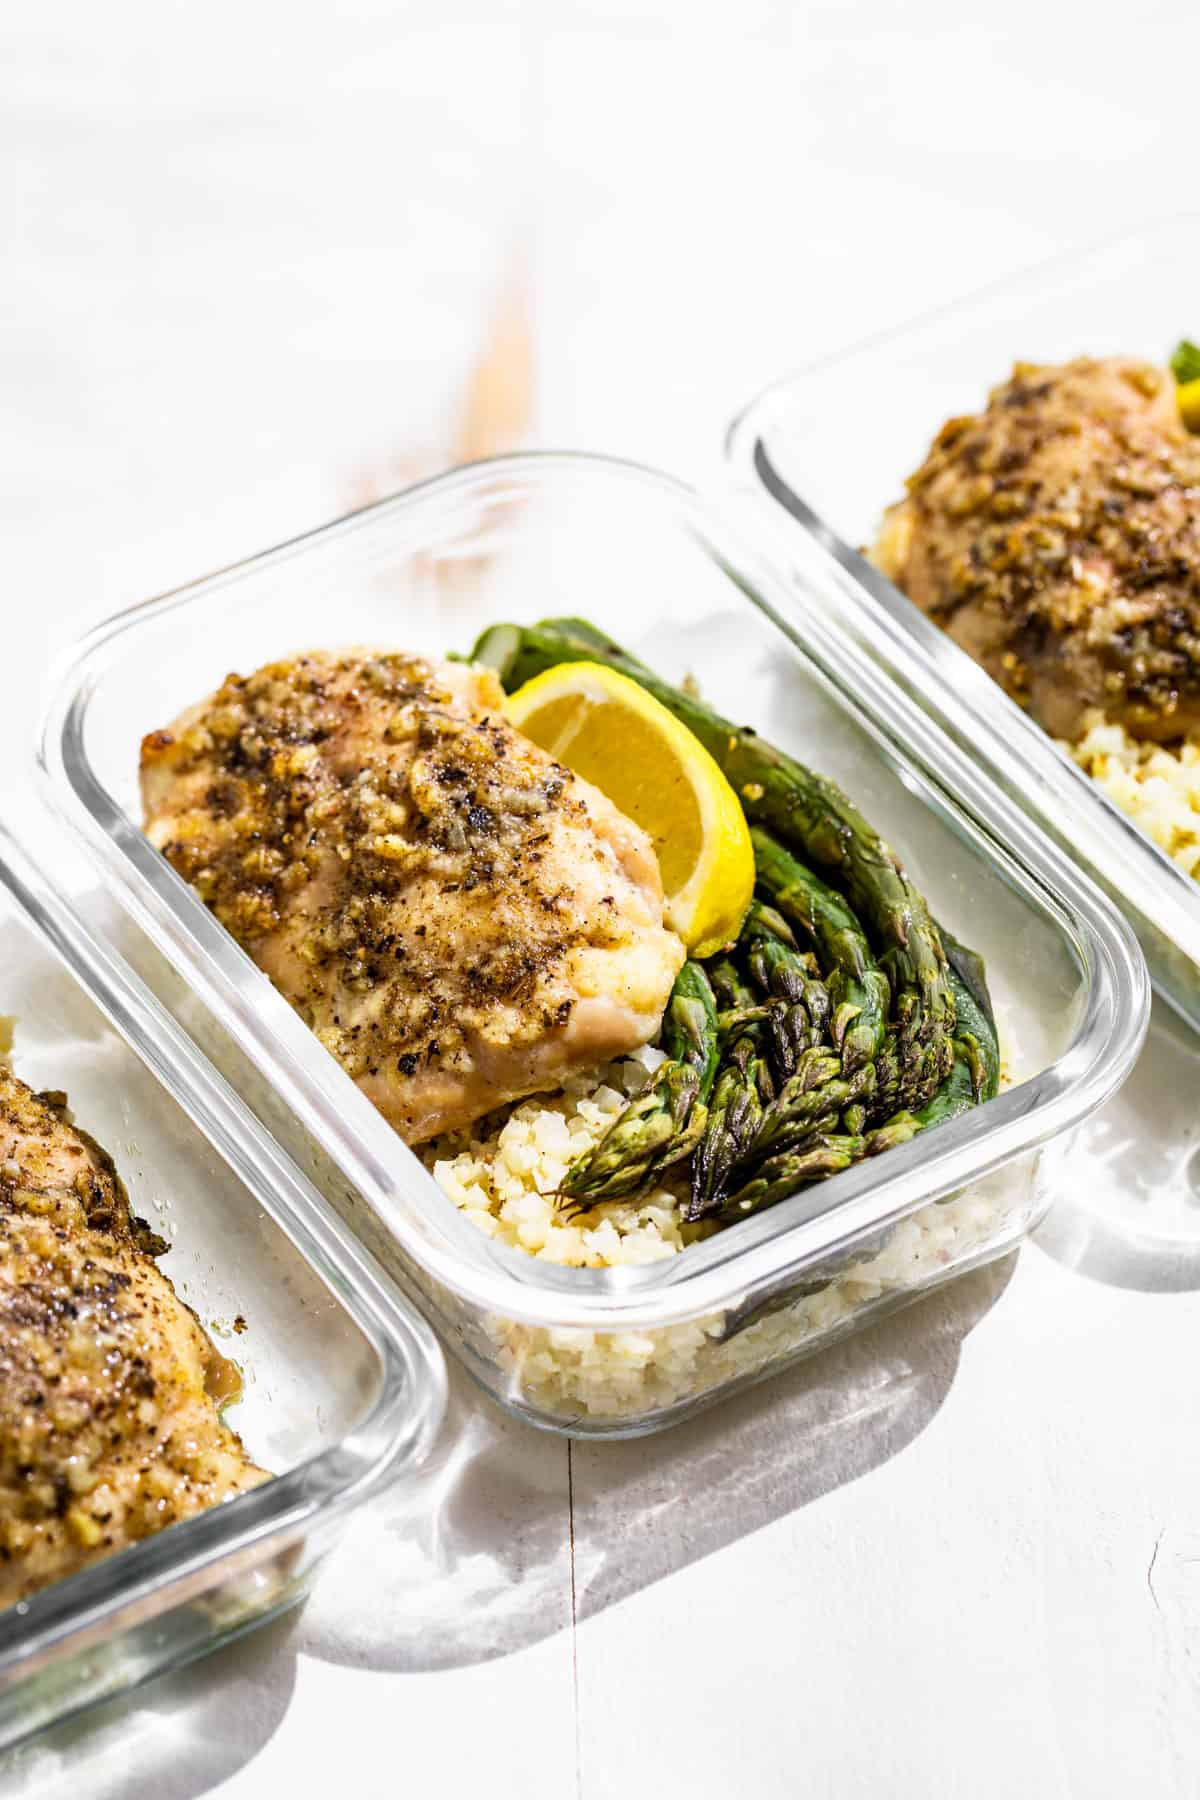 Garlic Herb Chicken thigh over cauliflower rice with asparagus on the side topped with a lemon wedge.